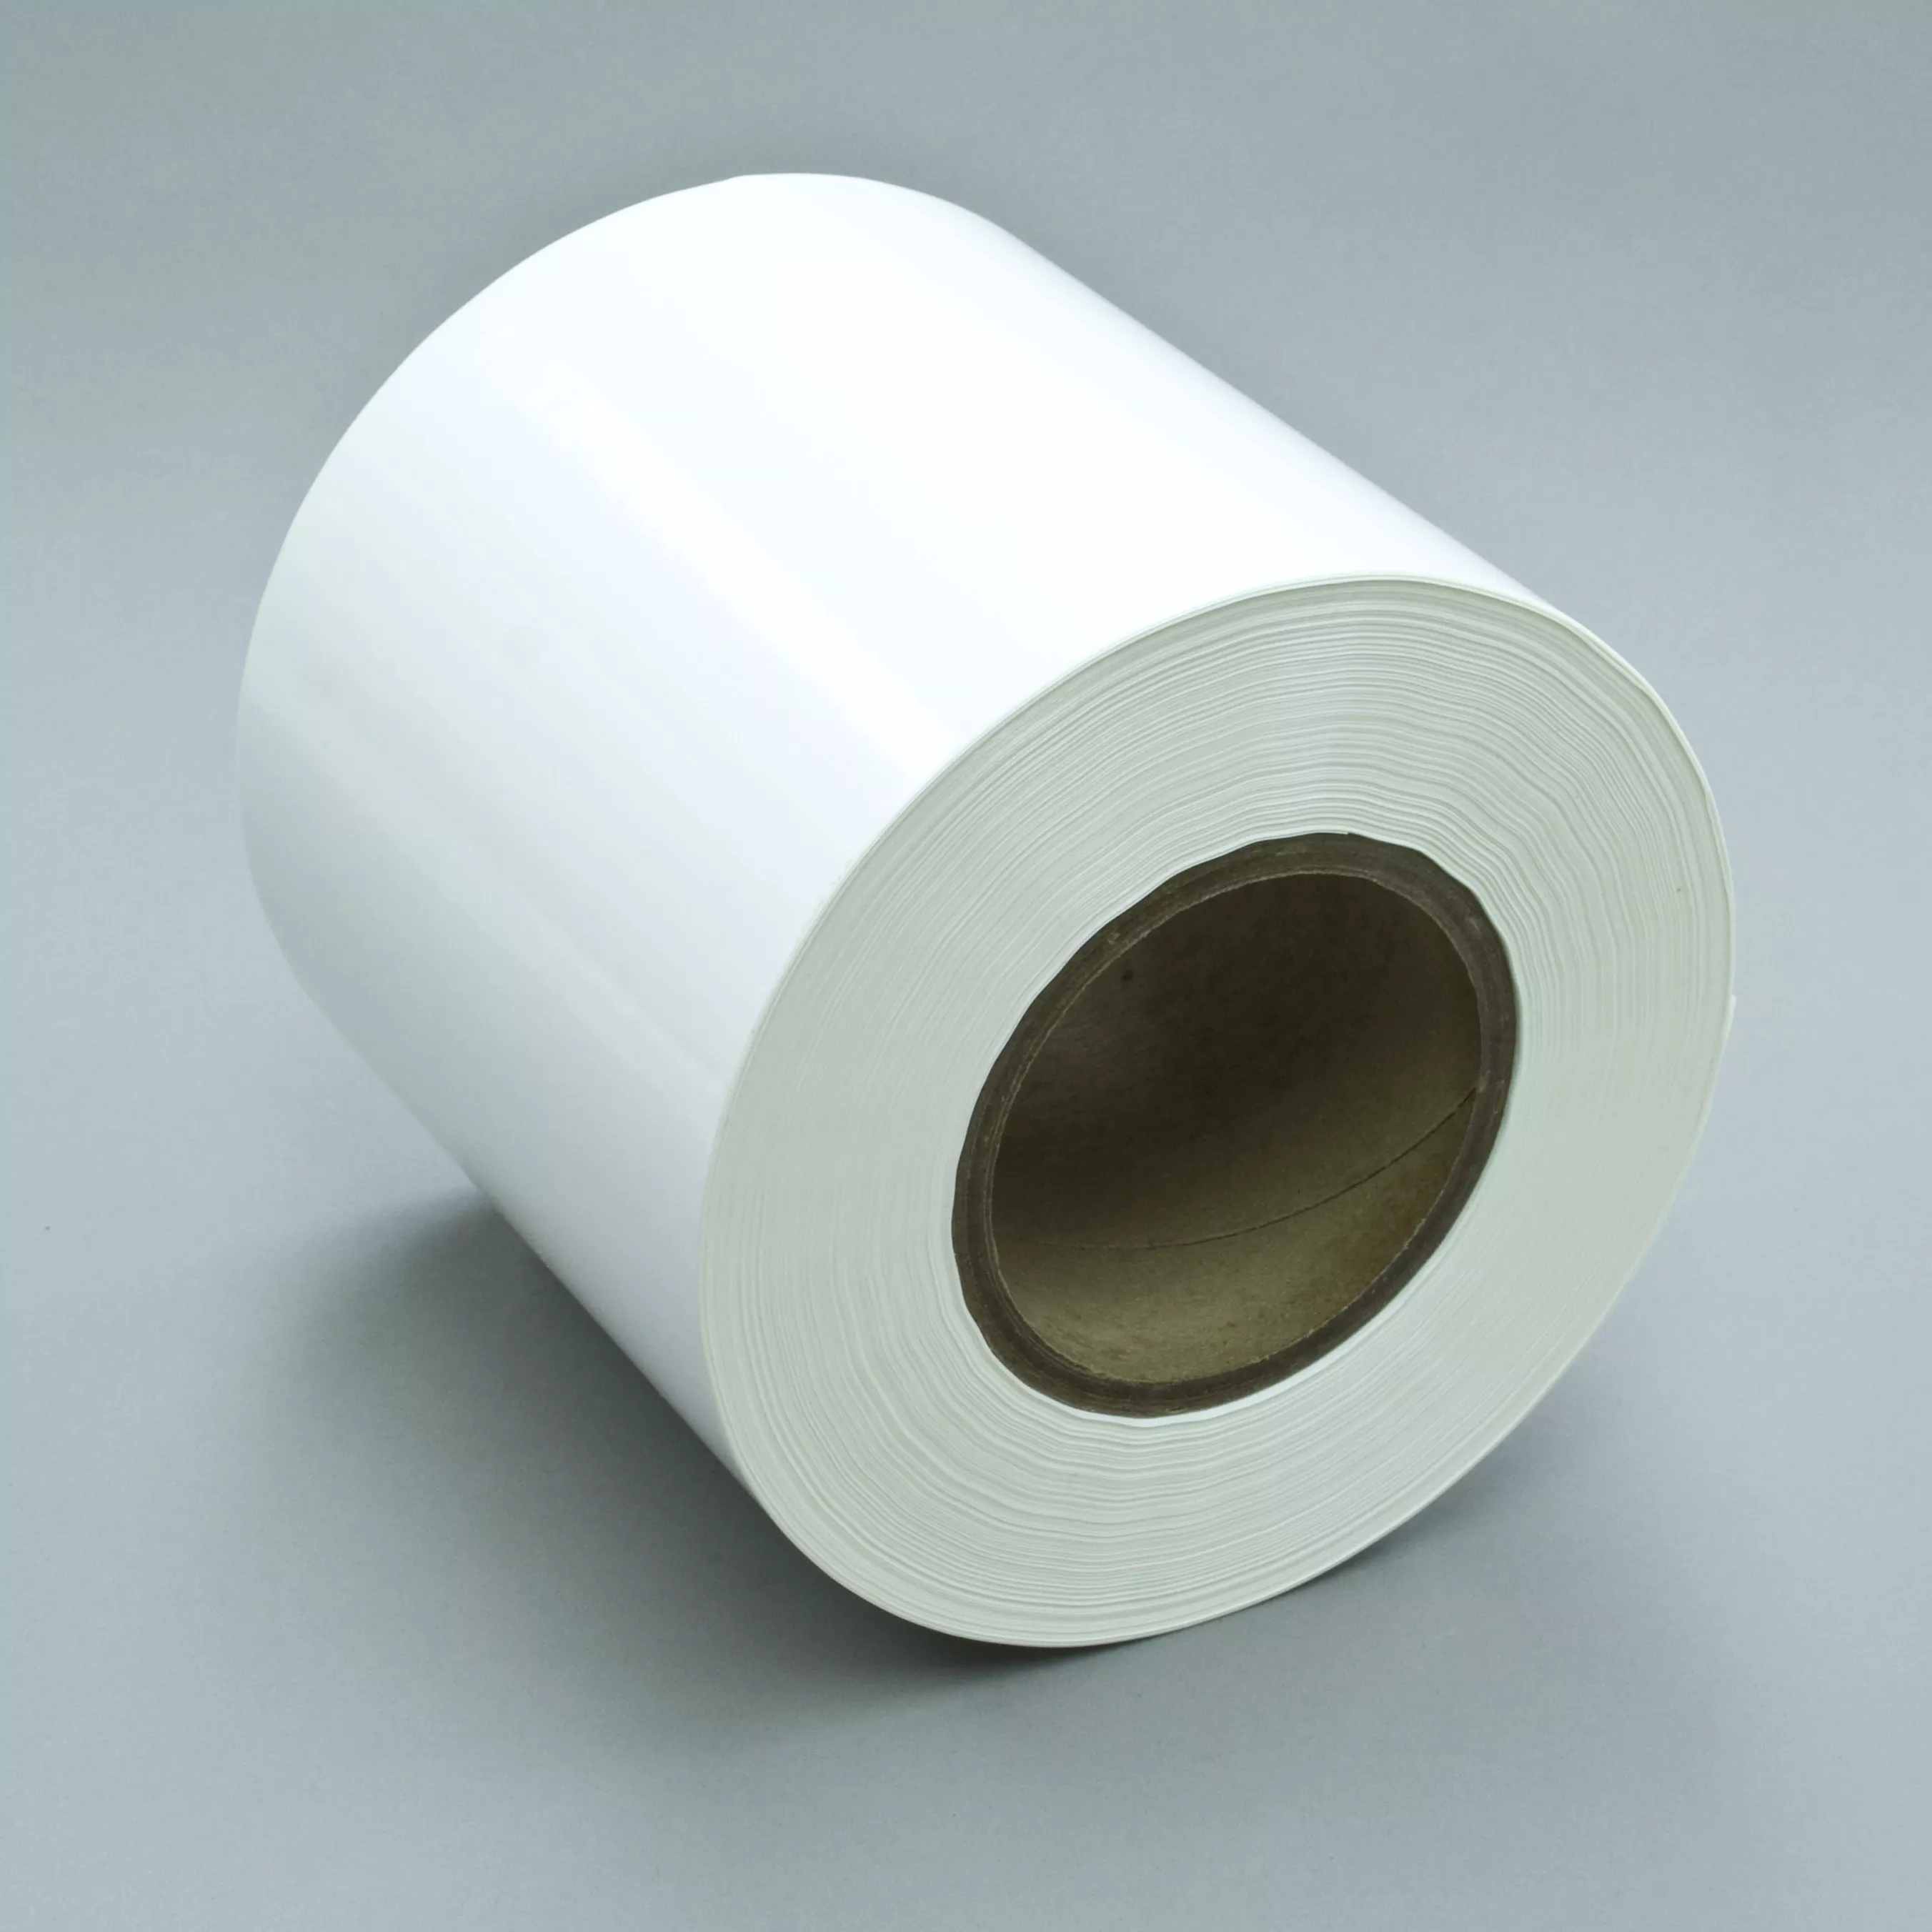 3M™ Thermal Transfer Label Material 3921, Matte White Acrylate, 6 in x
1668 ft, 1 Roll/Case